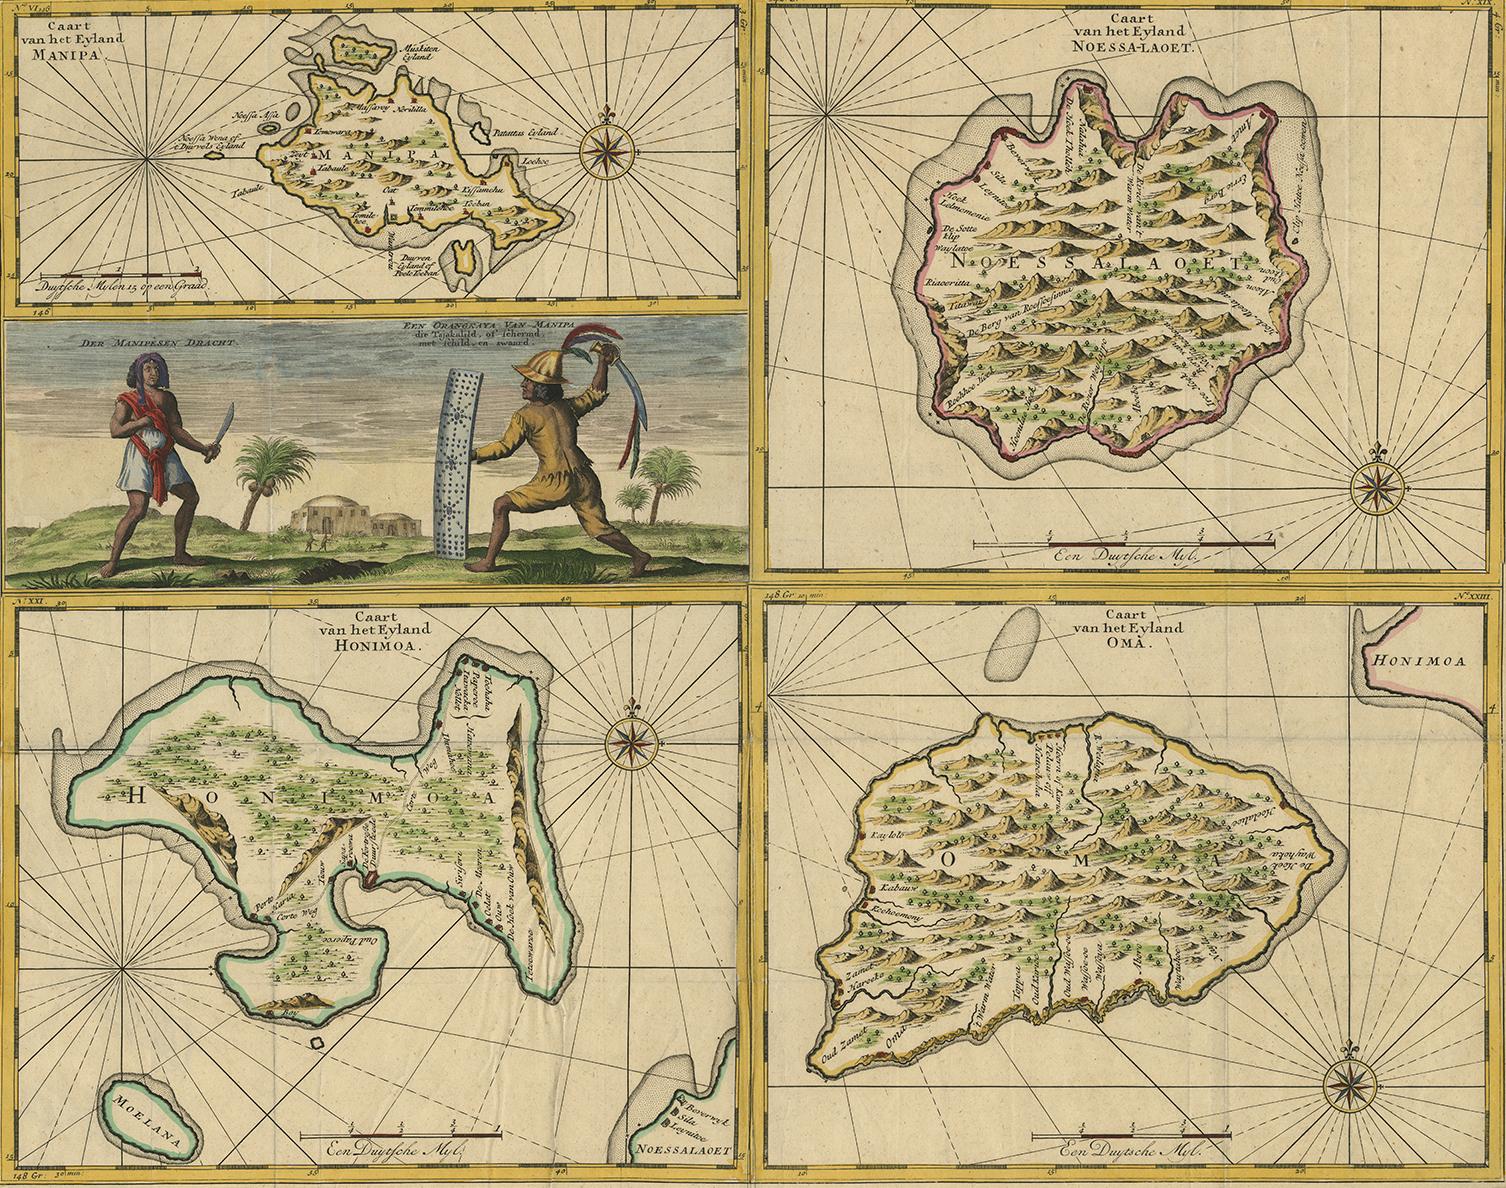 Four maps of islands and two figures in native dress. The islands are: Manipa, Nusa-Laut (Noessa-Laoet), Saparua (Honimoa) and Haruku (Oma). These islands are all part of the Maluku Province of Indonesia, in the Pacific Ocean.